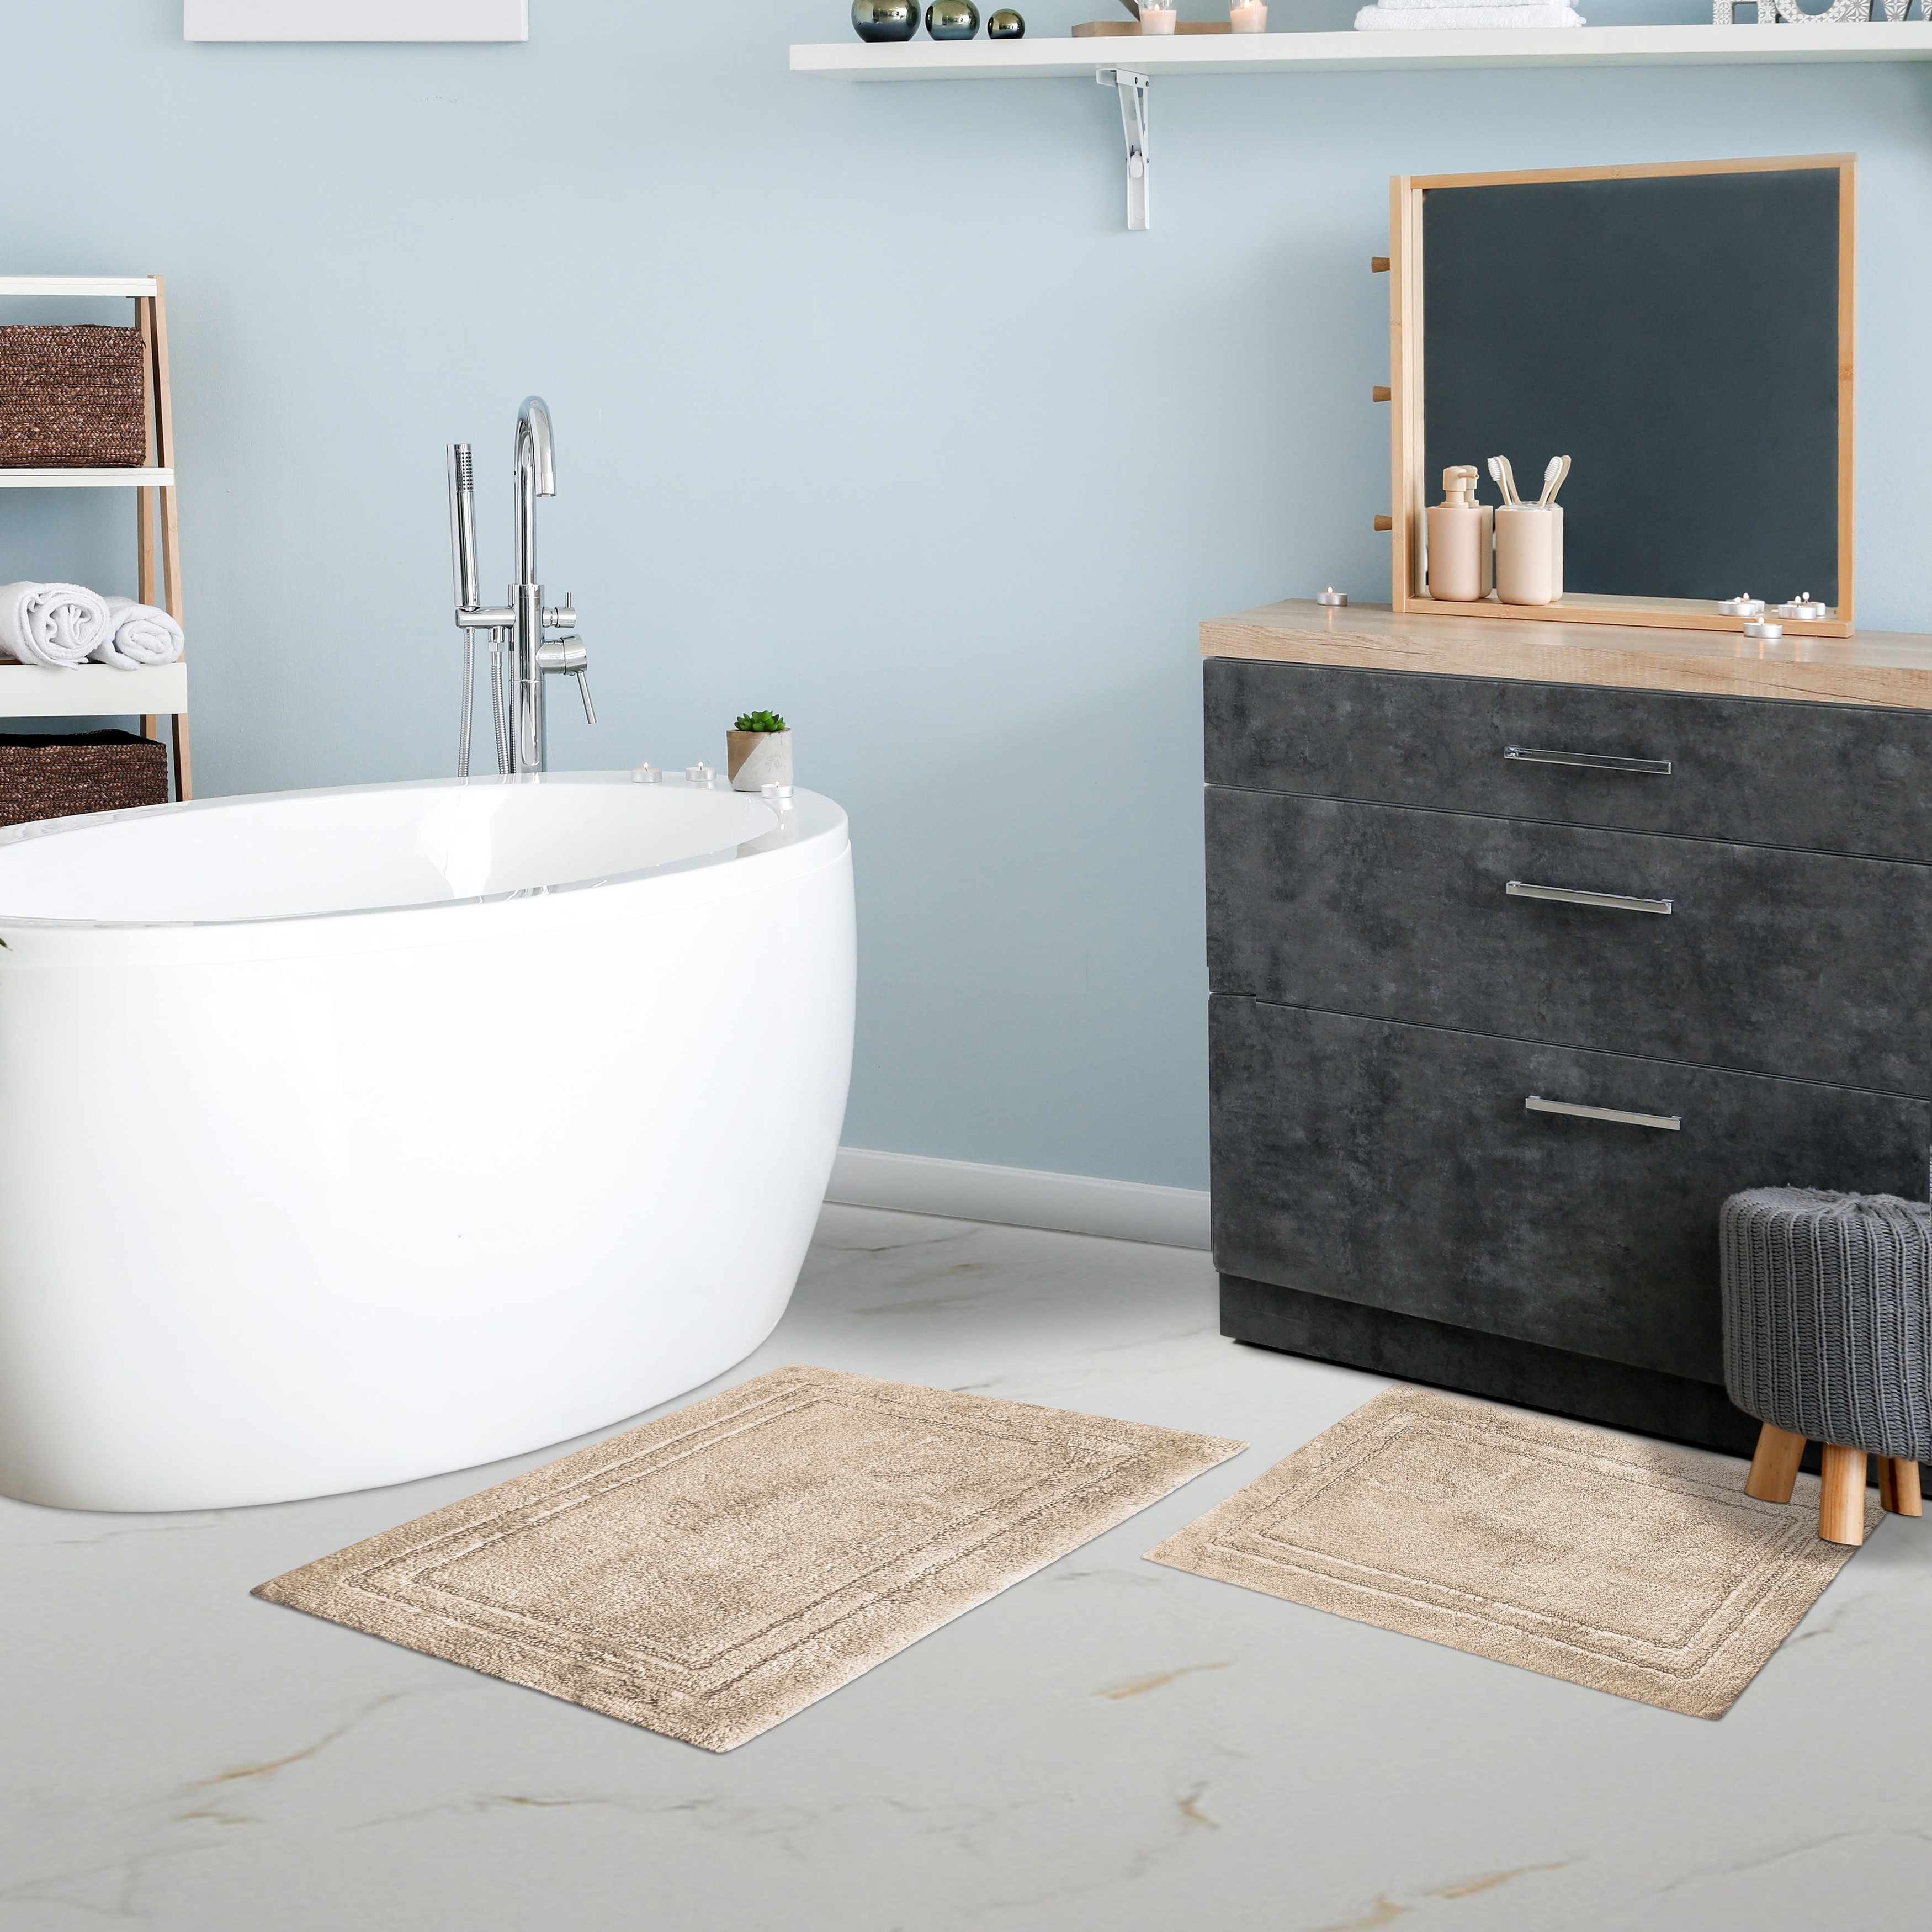 https://ak1.ostkcdn.com/images/products/is/images/direct/5870a25add3e4bc26783979fdaba3d4a0660b024/Miranda-Haus-Cotton-Solid-Non-slip-Backing-Bath-Rug-%28Set-of-2%29.jpg